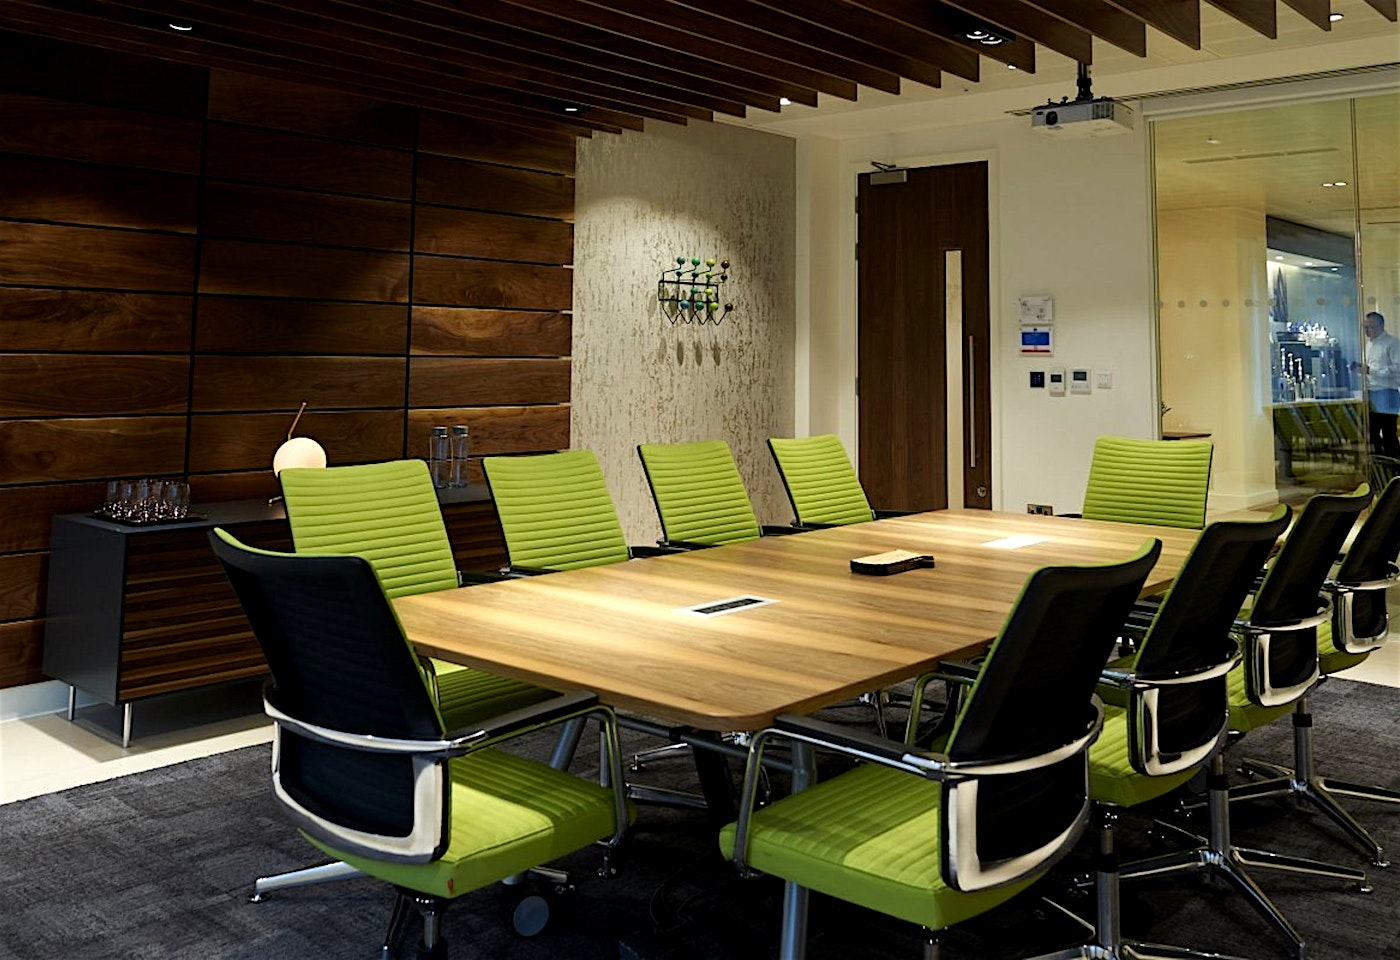 direct boardroom at etc venues fenchurch street liverpool street meeting room london